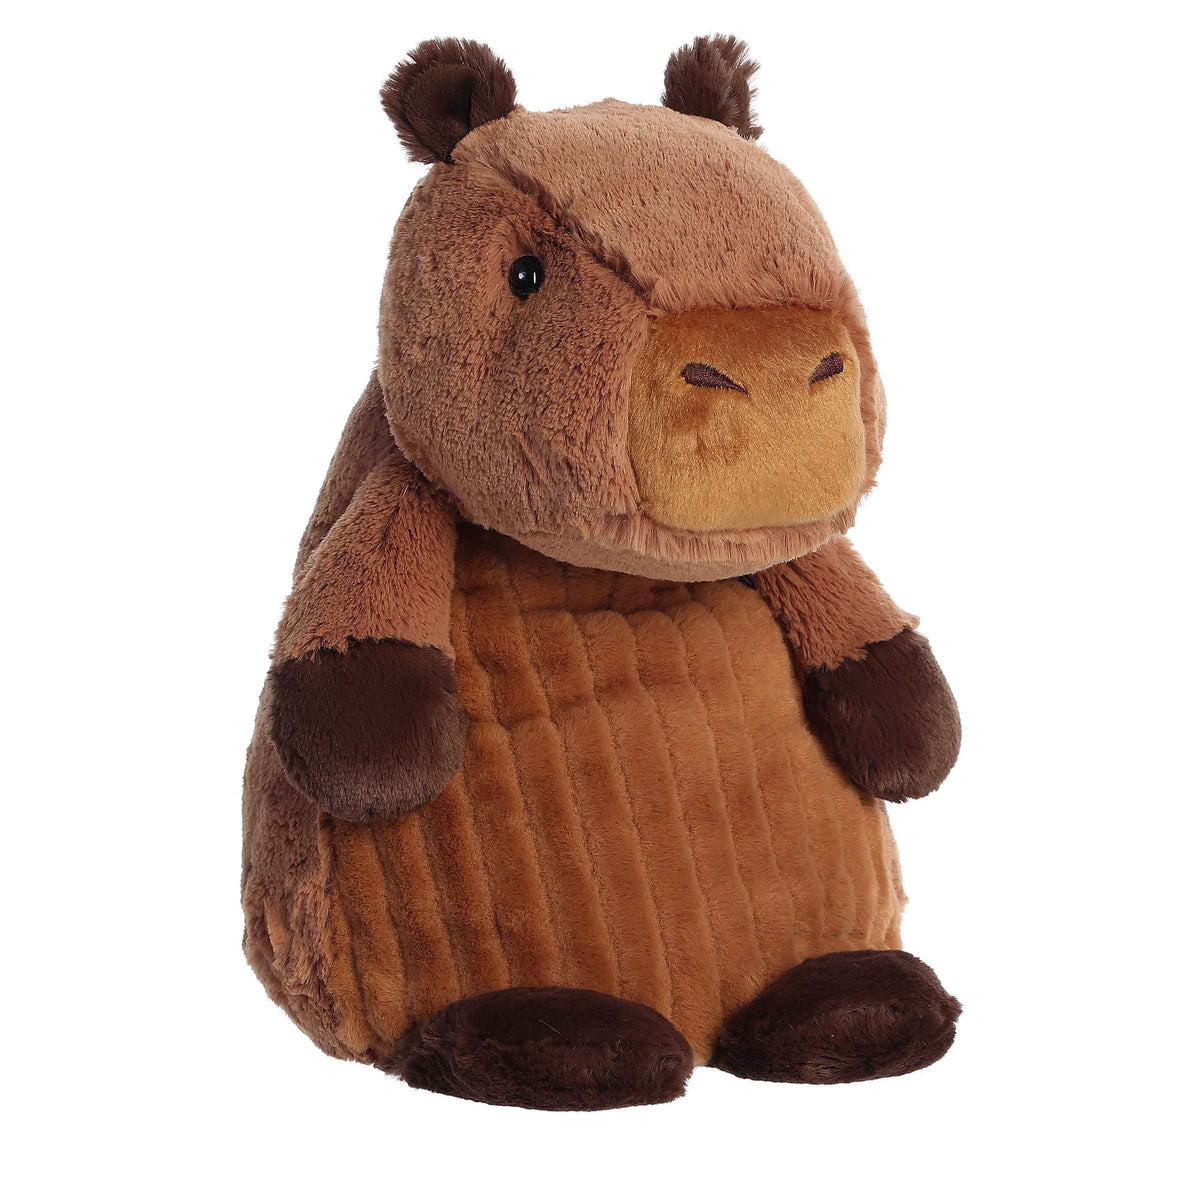 Cozy Capybara plush, soft brown fur, plump and seated with gentle eyes and rounded ears from Huggle Pals